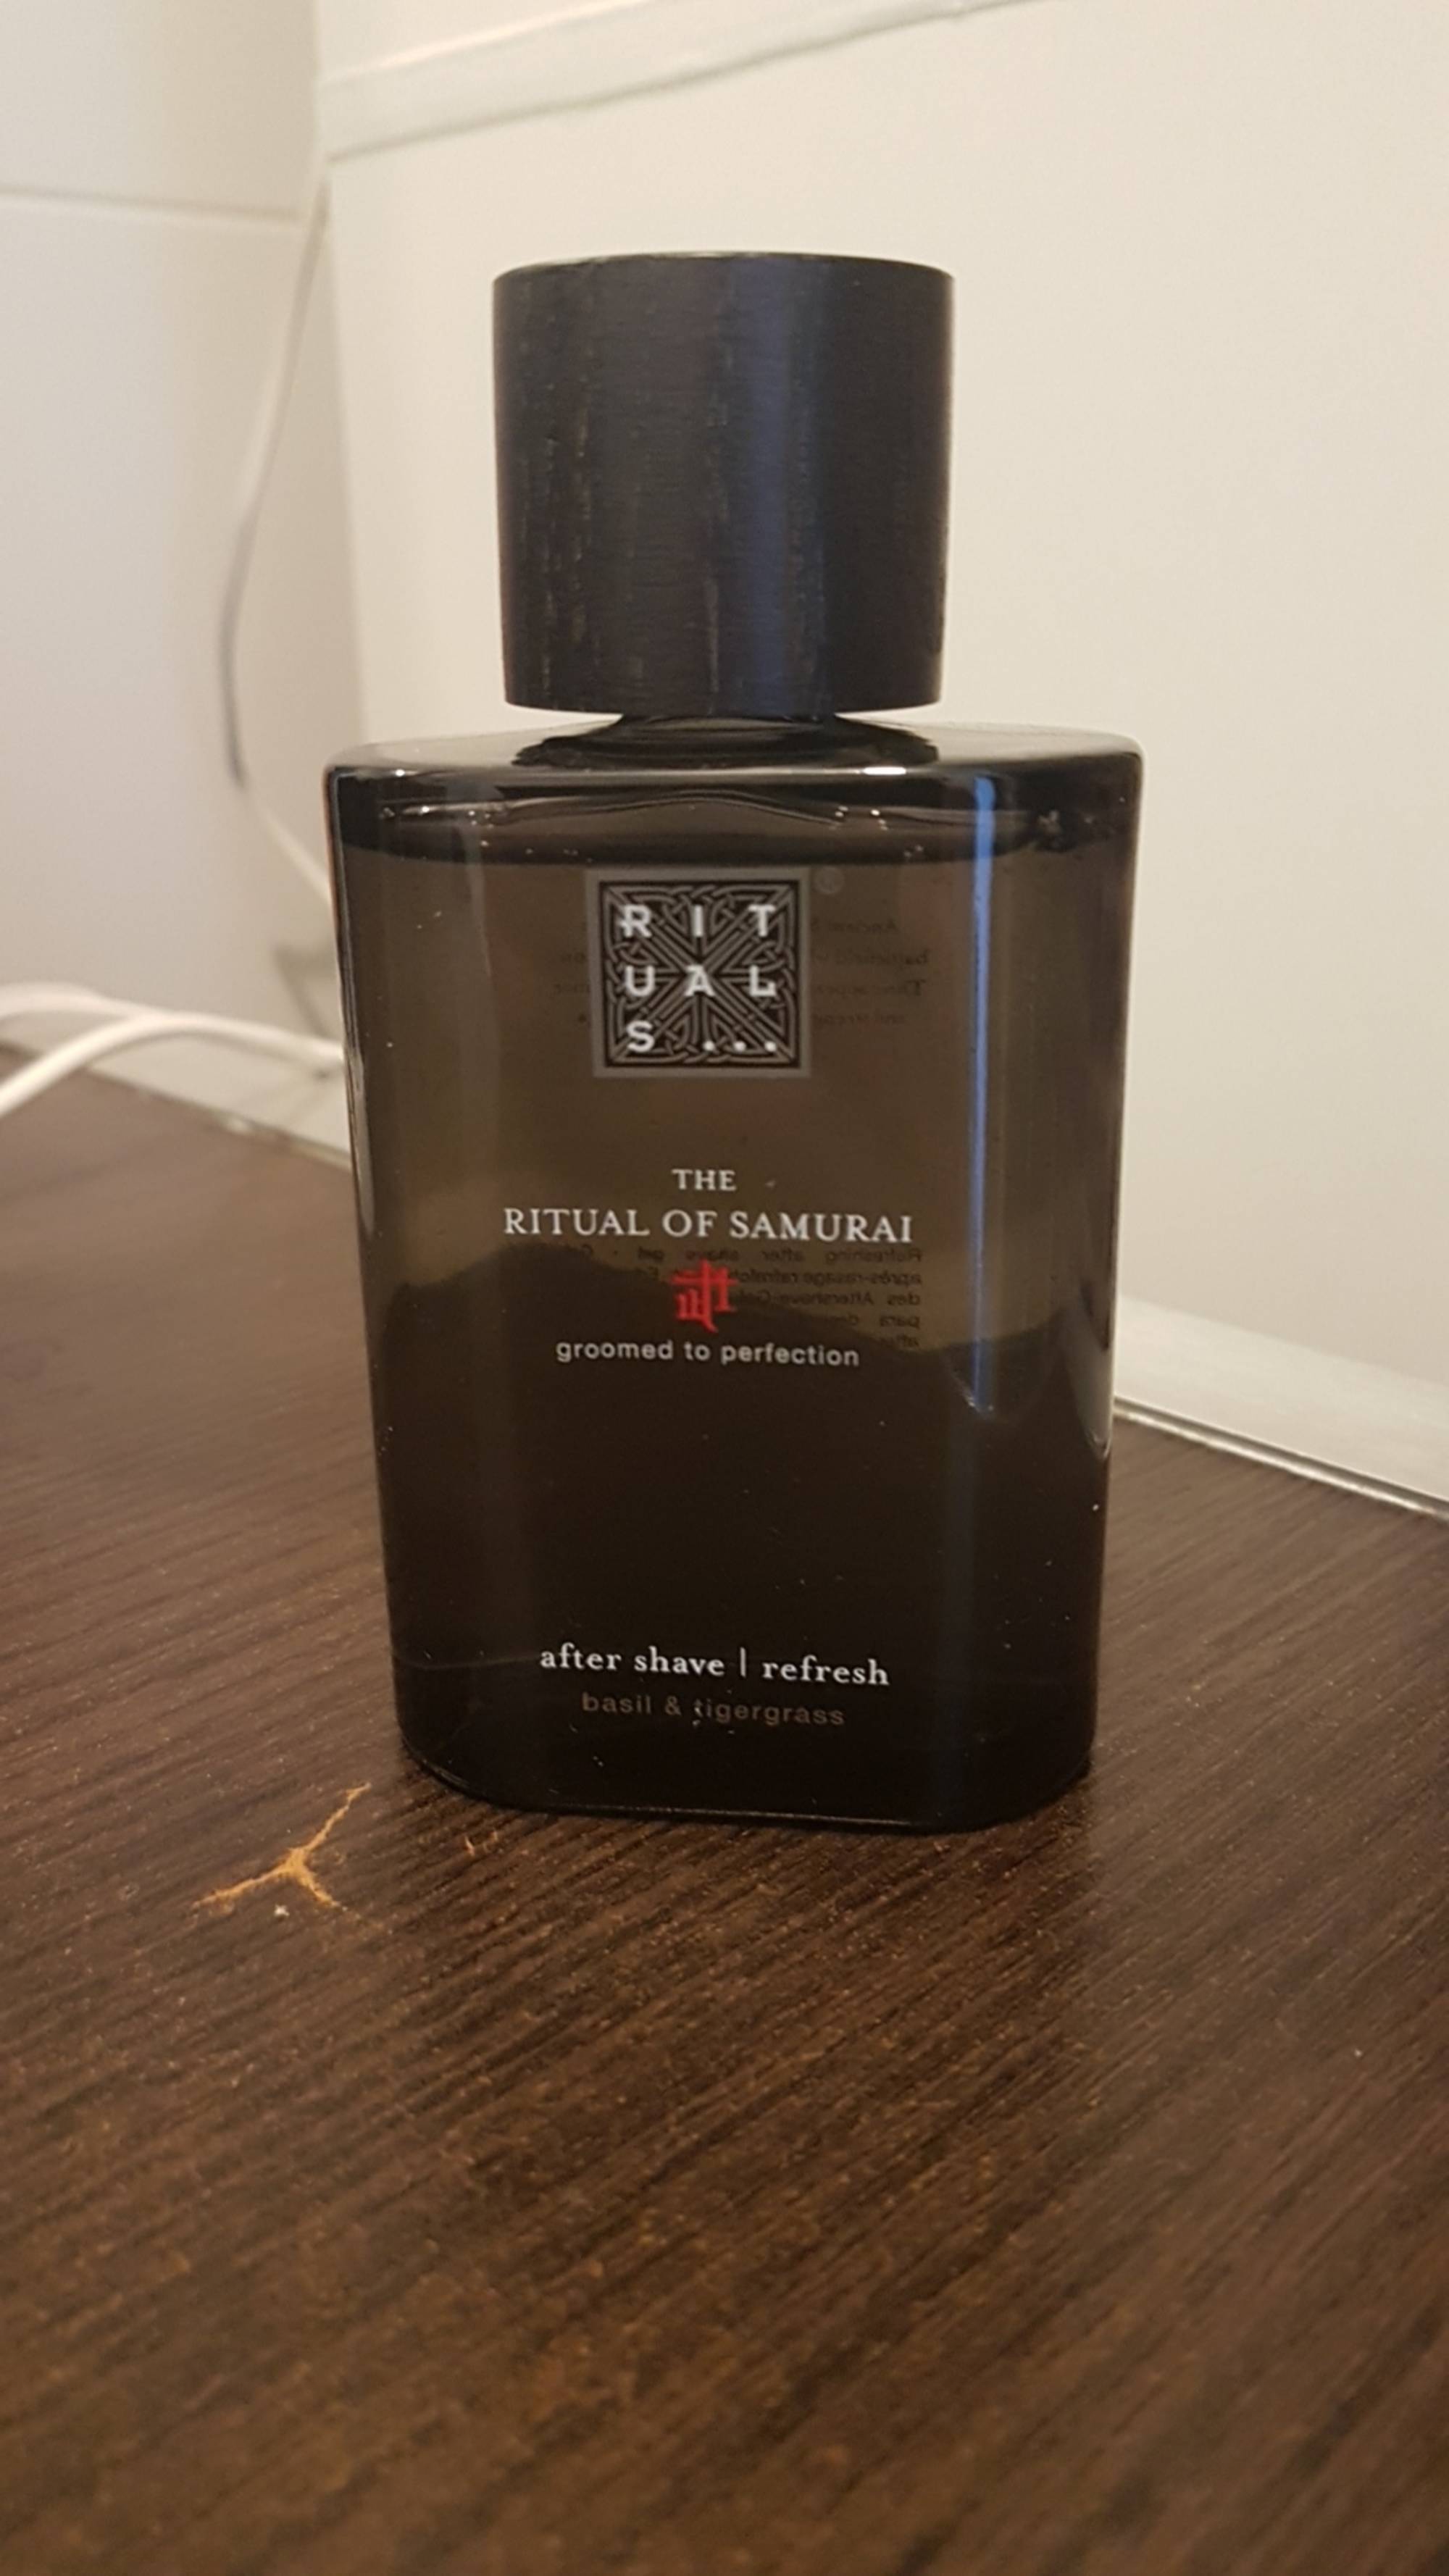 RITUALS - The Ritual of Samurai - After shave